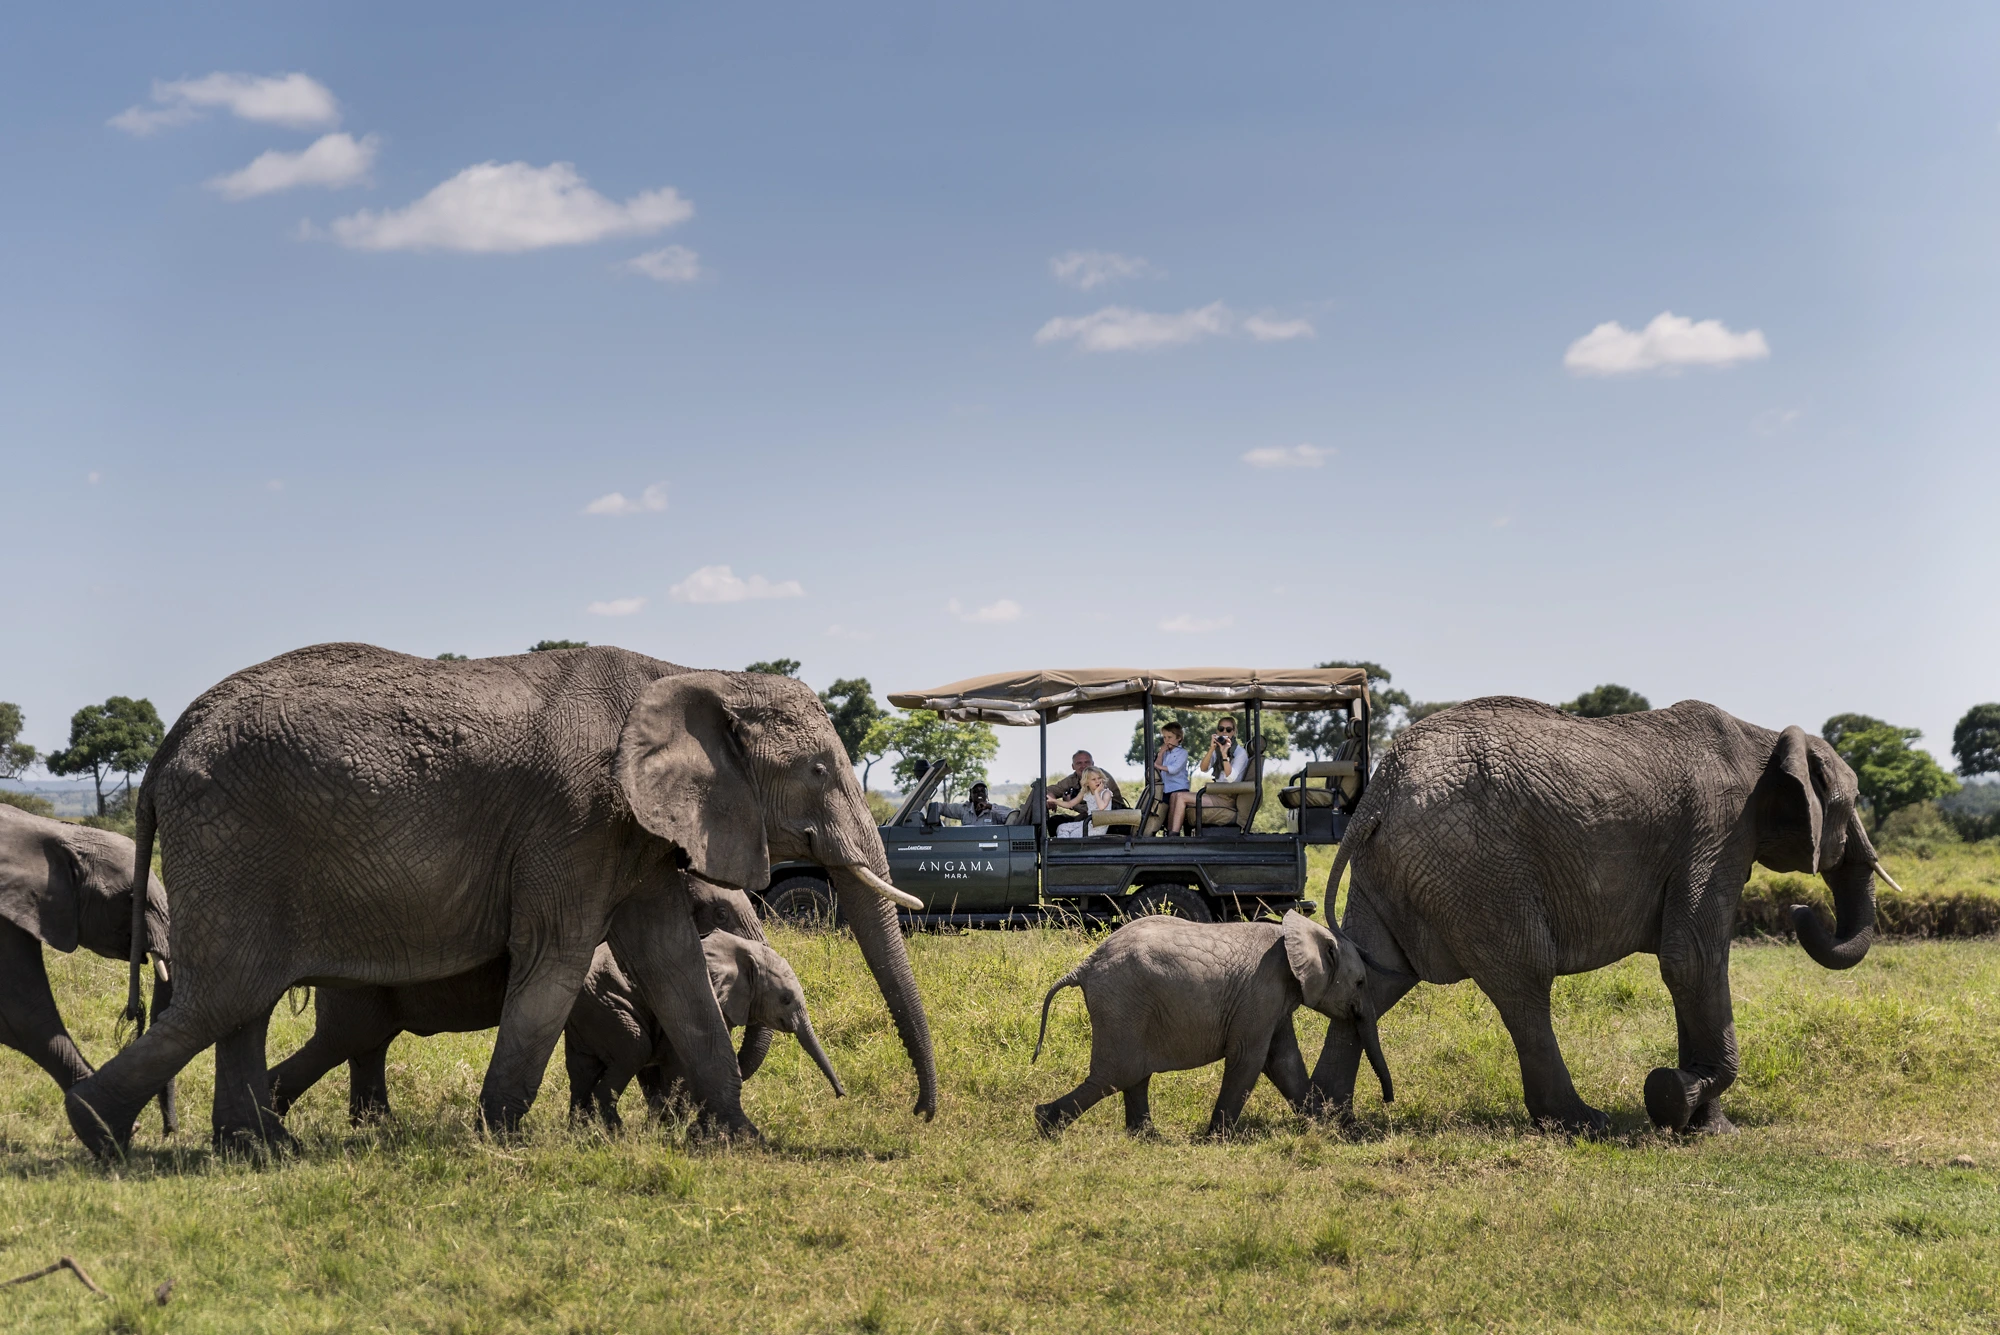 A breathtaking view of a herd of elephants in the Masai Mara during a luxury safari experience